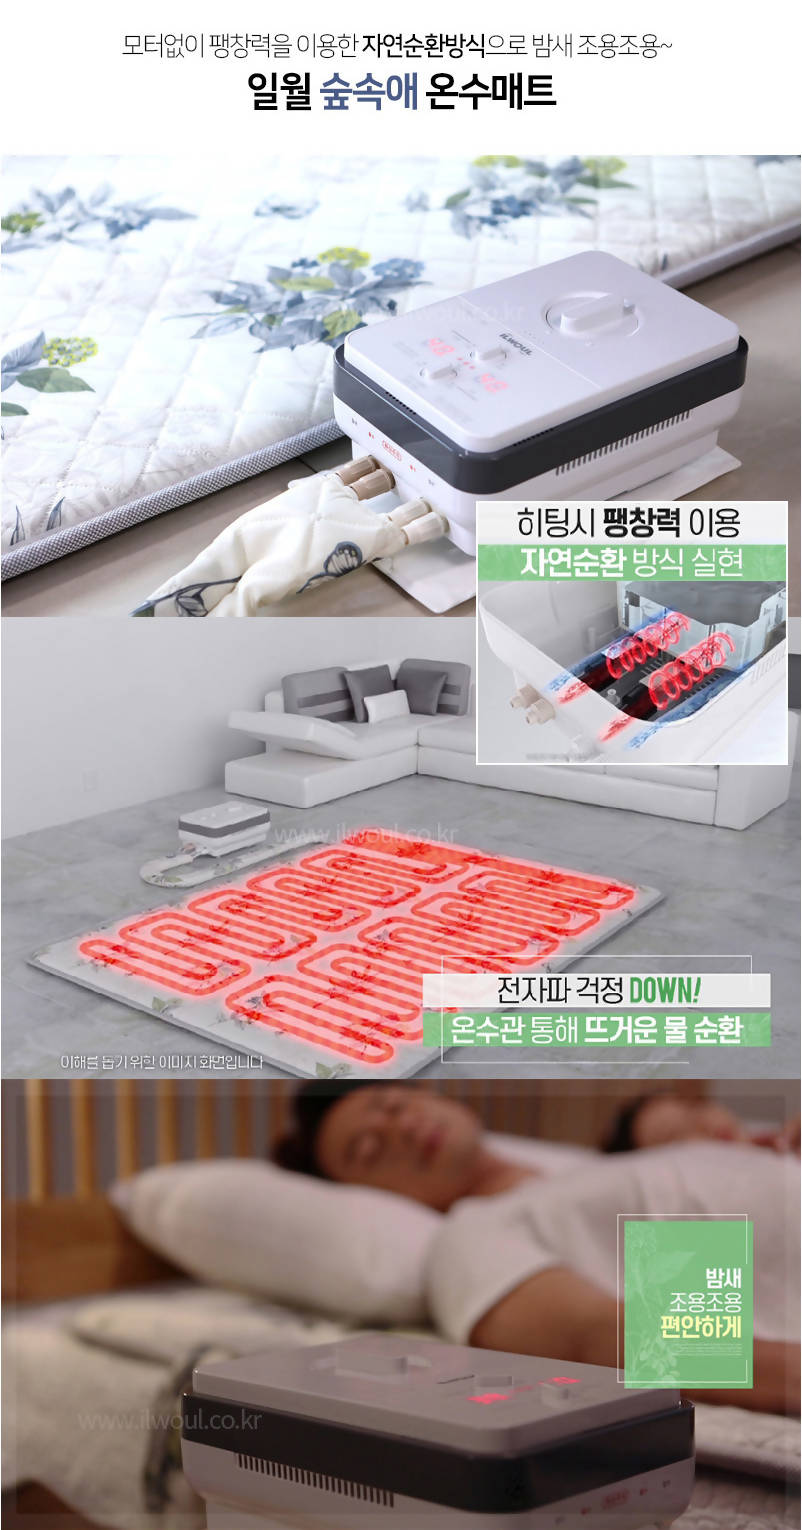 ILWOUL LOVE IN THE FOREST WARM WATER ELECTRIC MAT